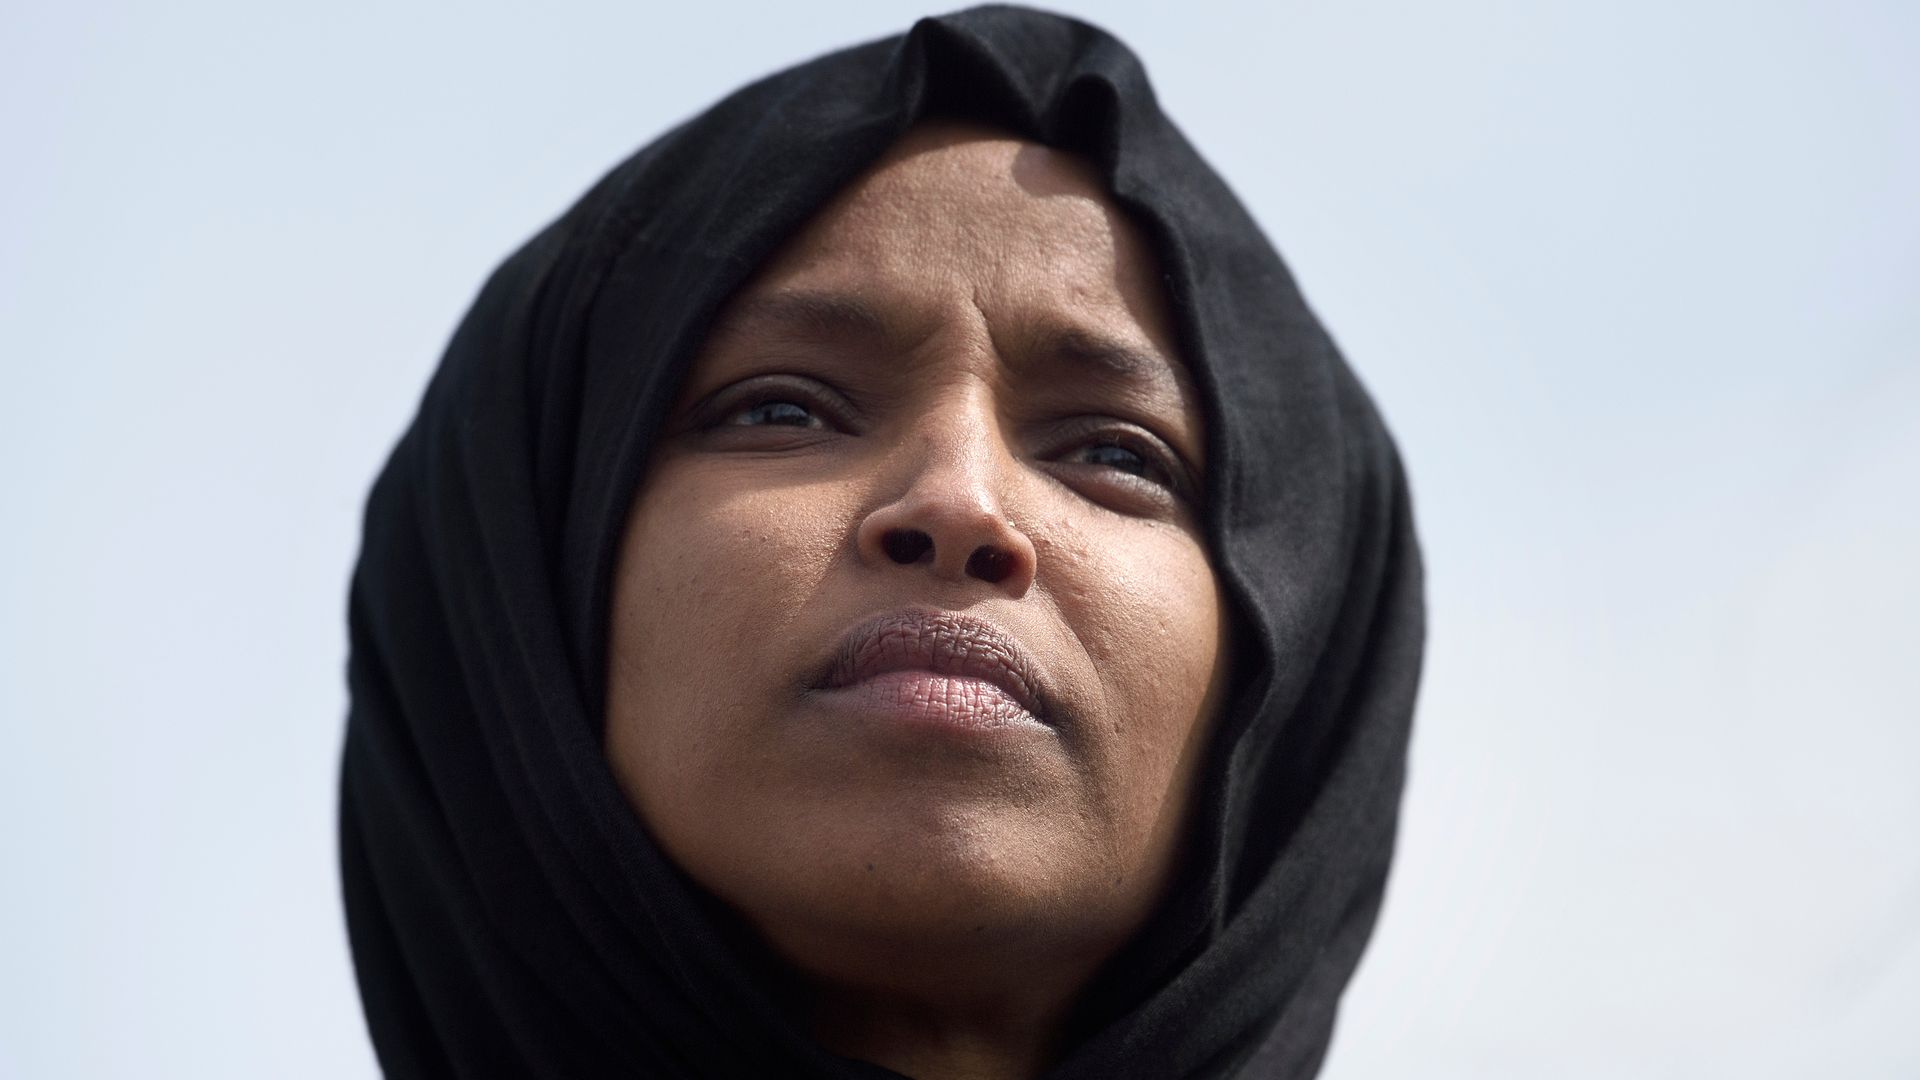 Ilhan Omar encountered protesters Saturday outside at a California fundraising event for an advocacy group representing Muslim-Americans.